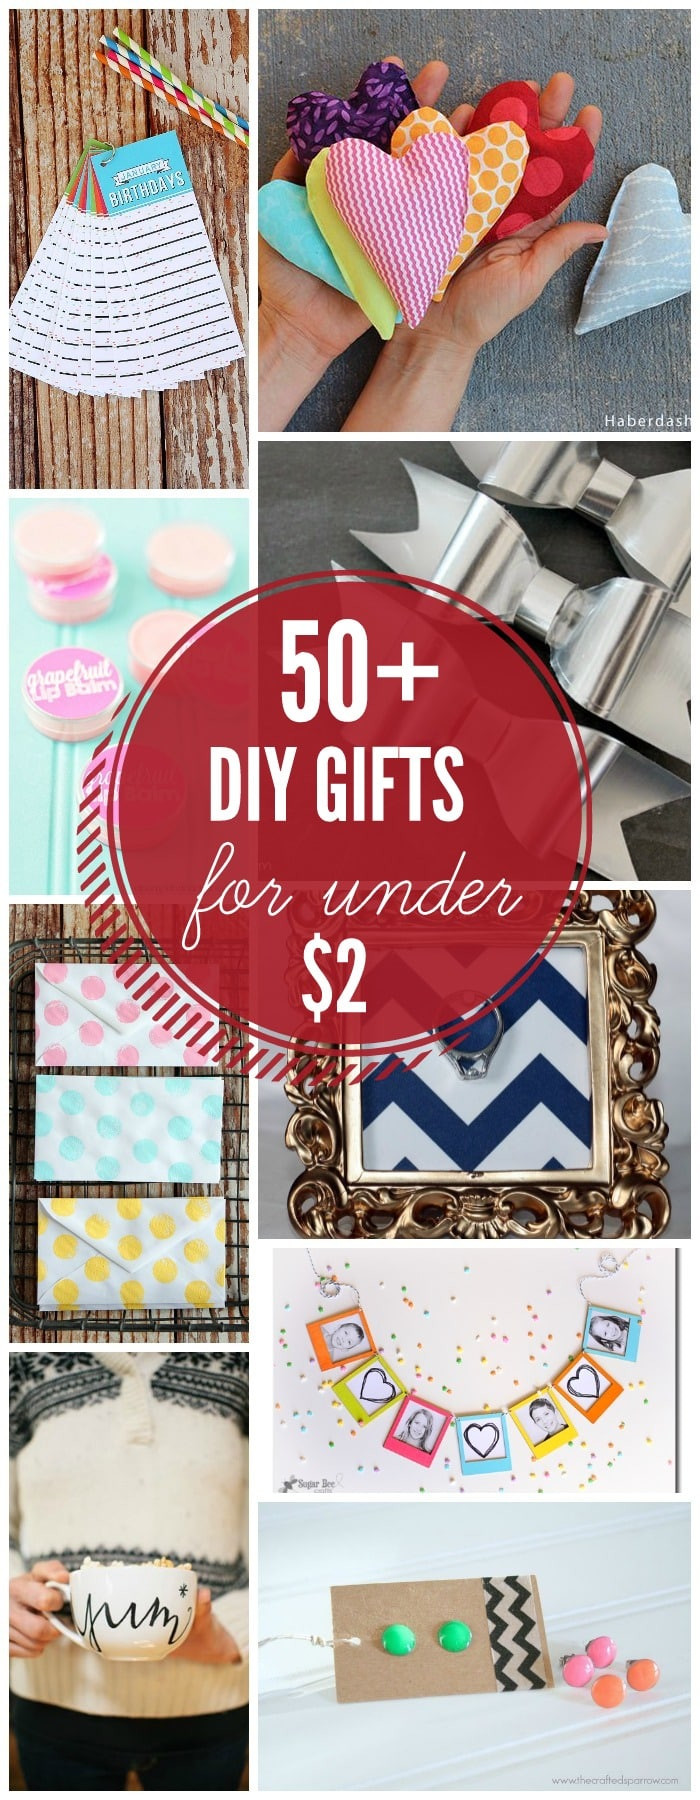 Cool DIY Gifts
 DIY Gifts Under $2